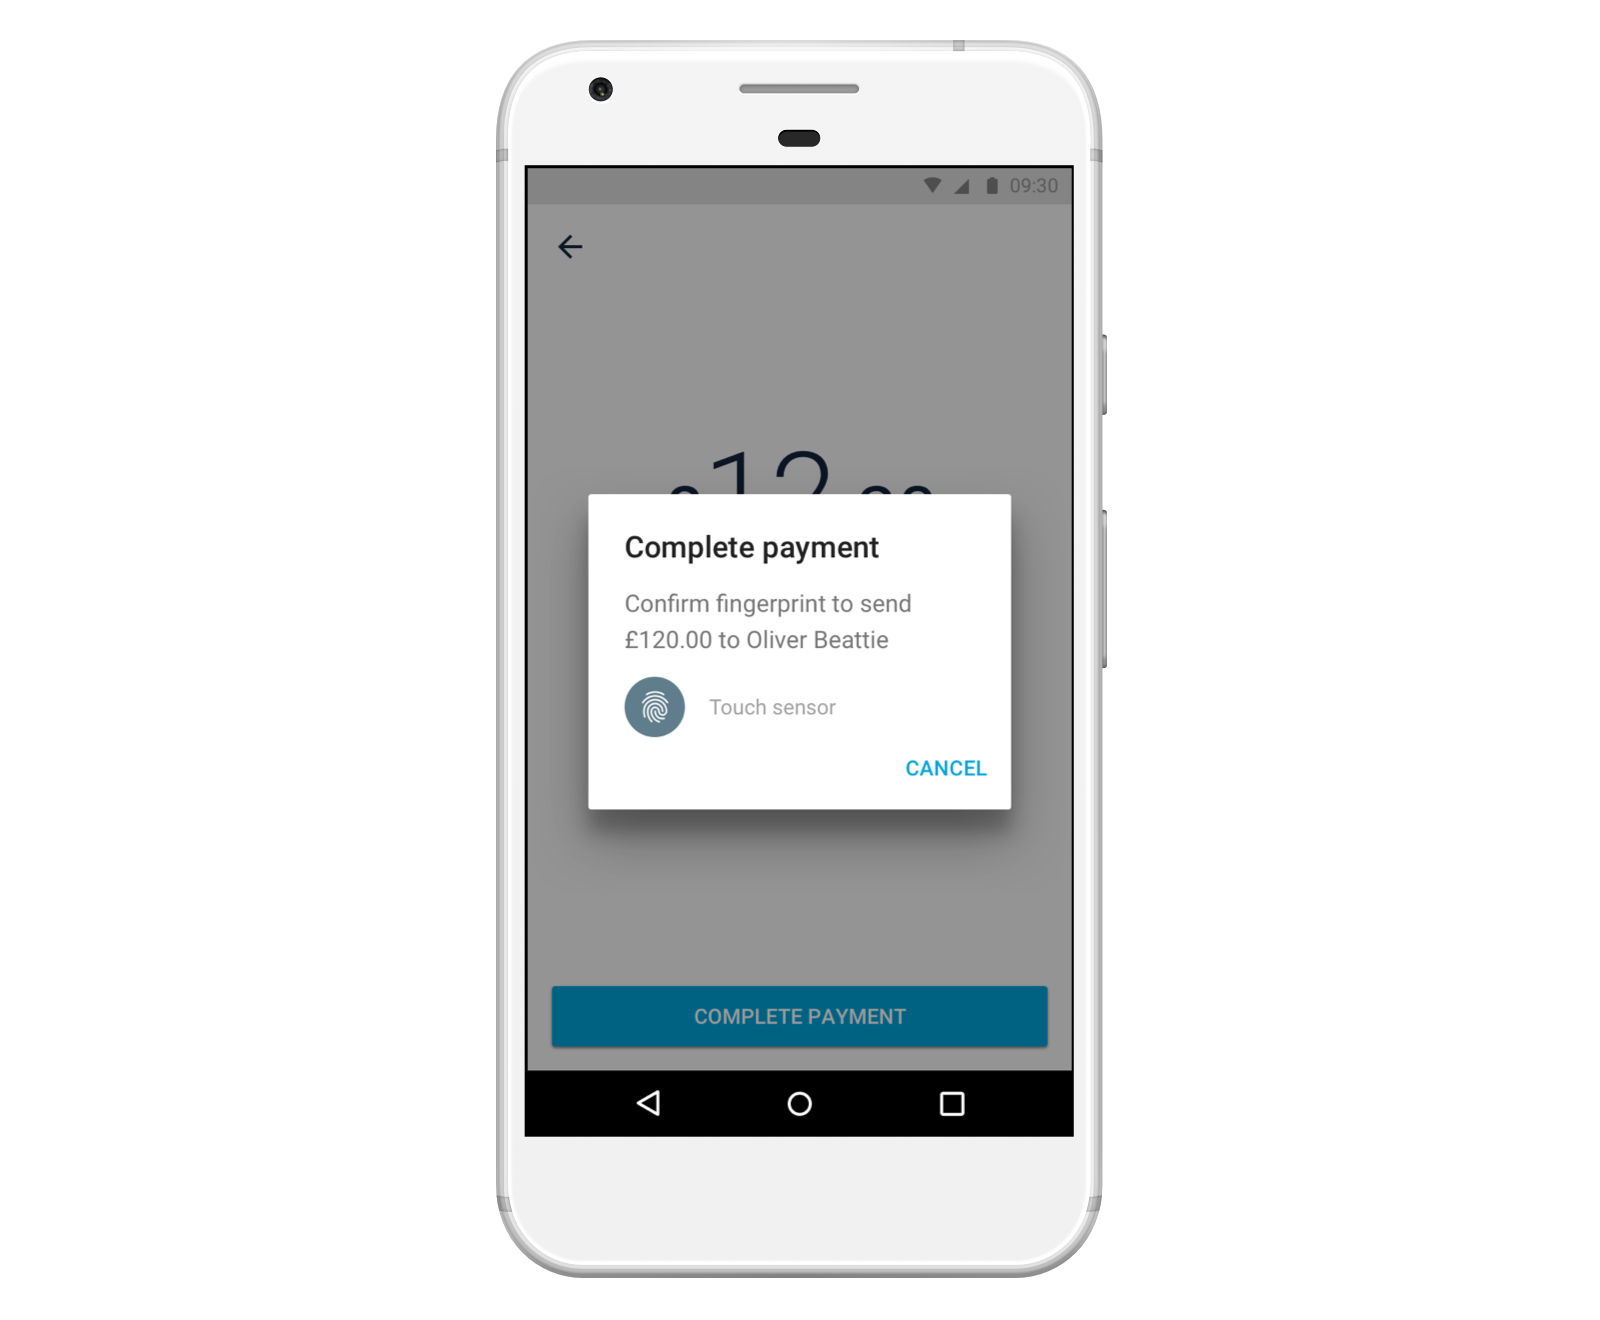 Pay with Fingerprint on Android